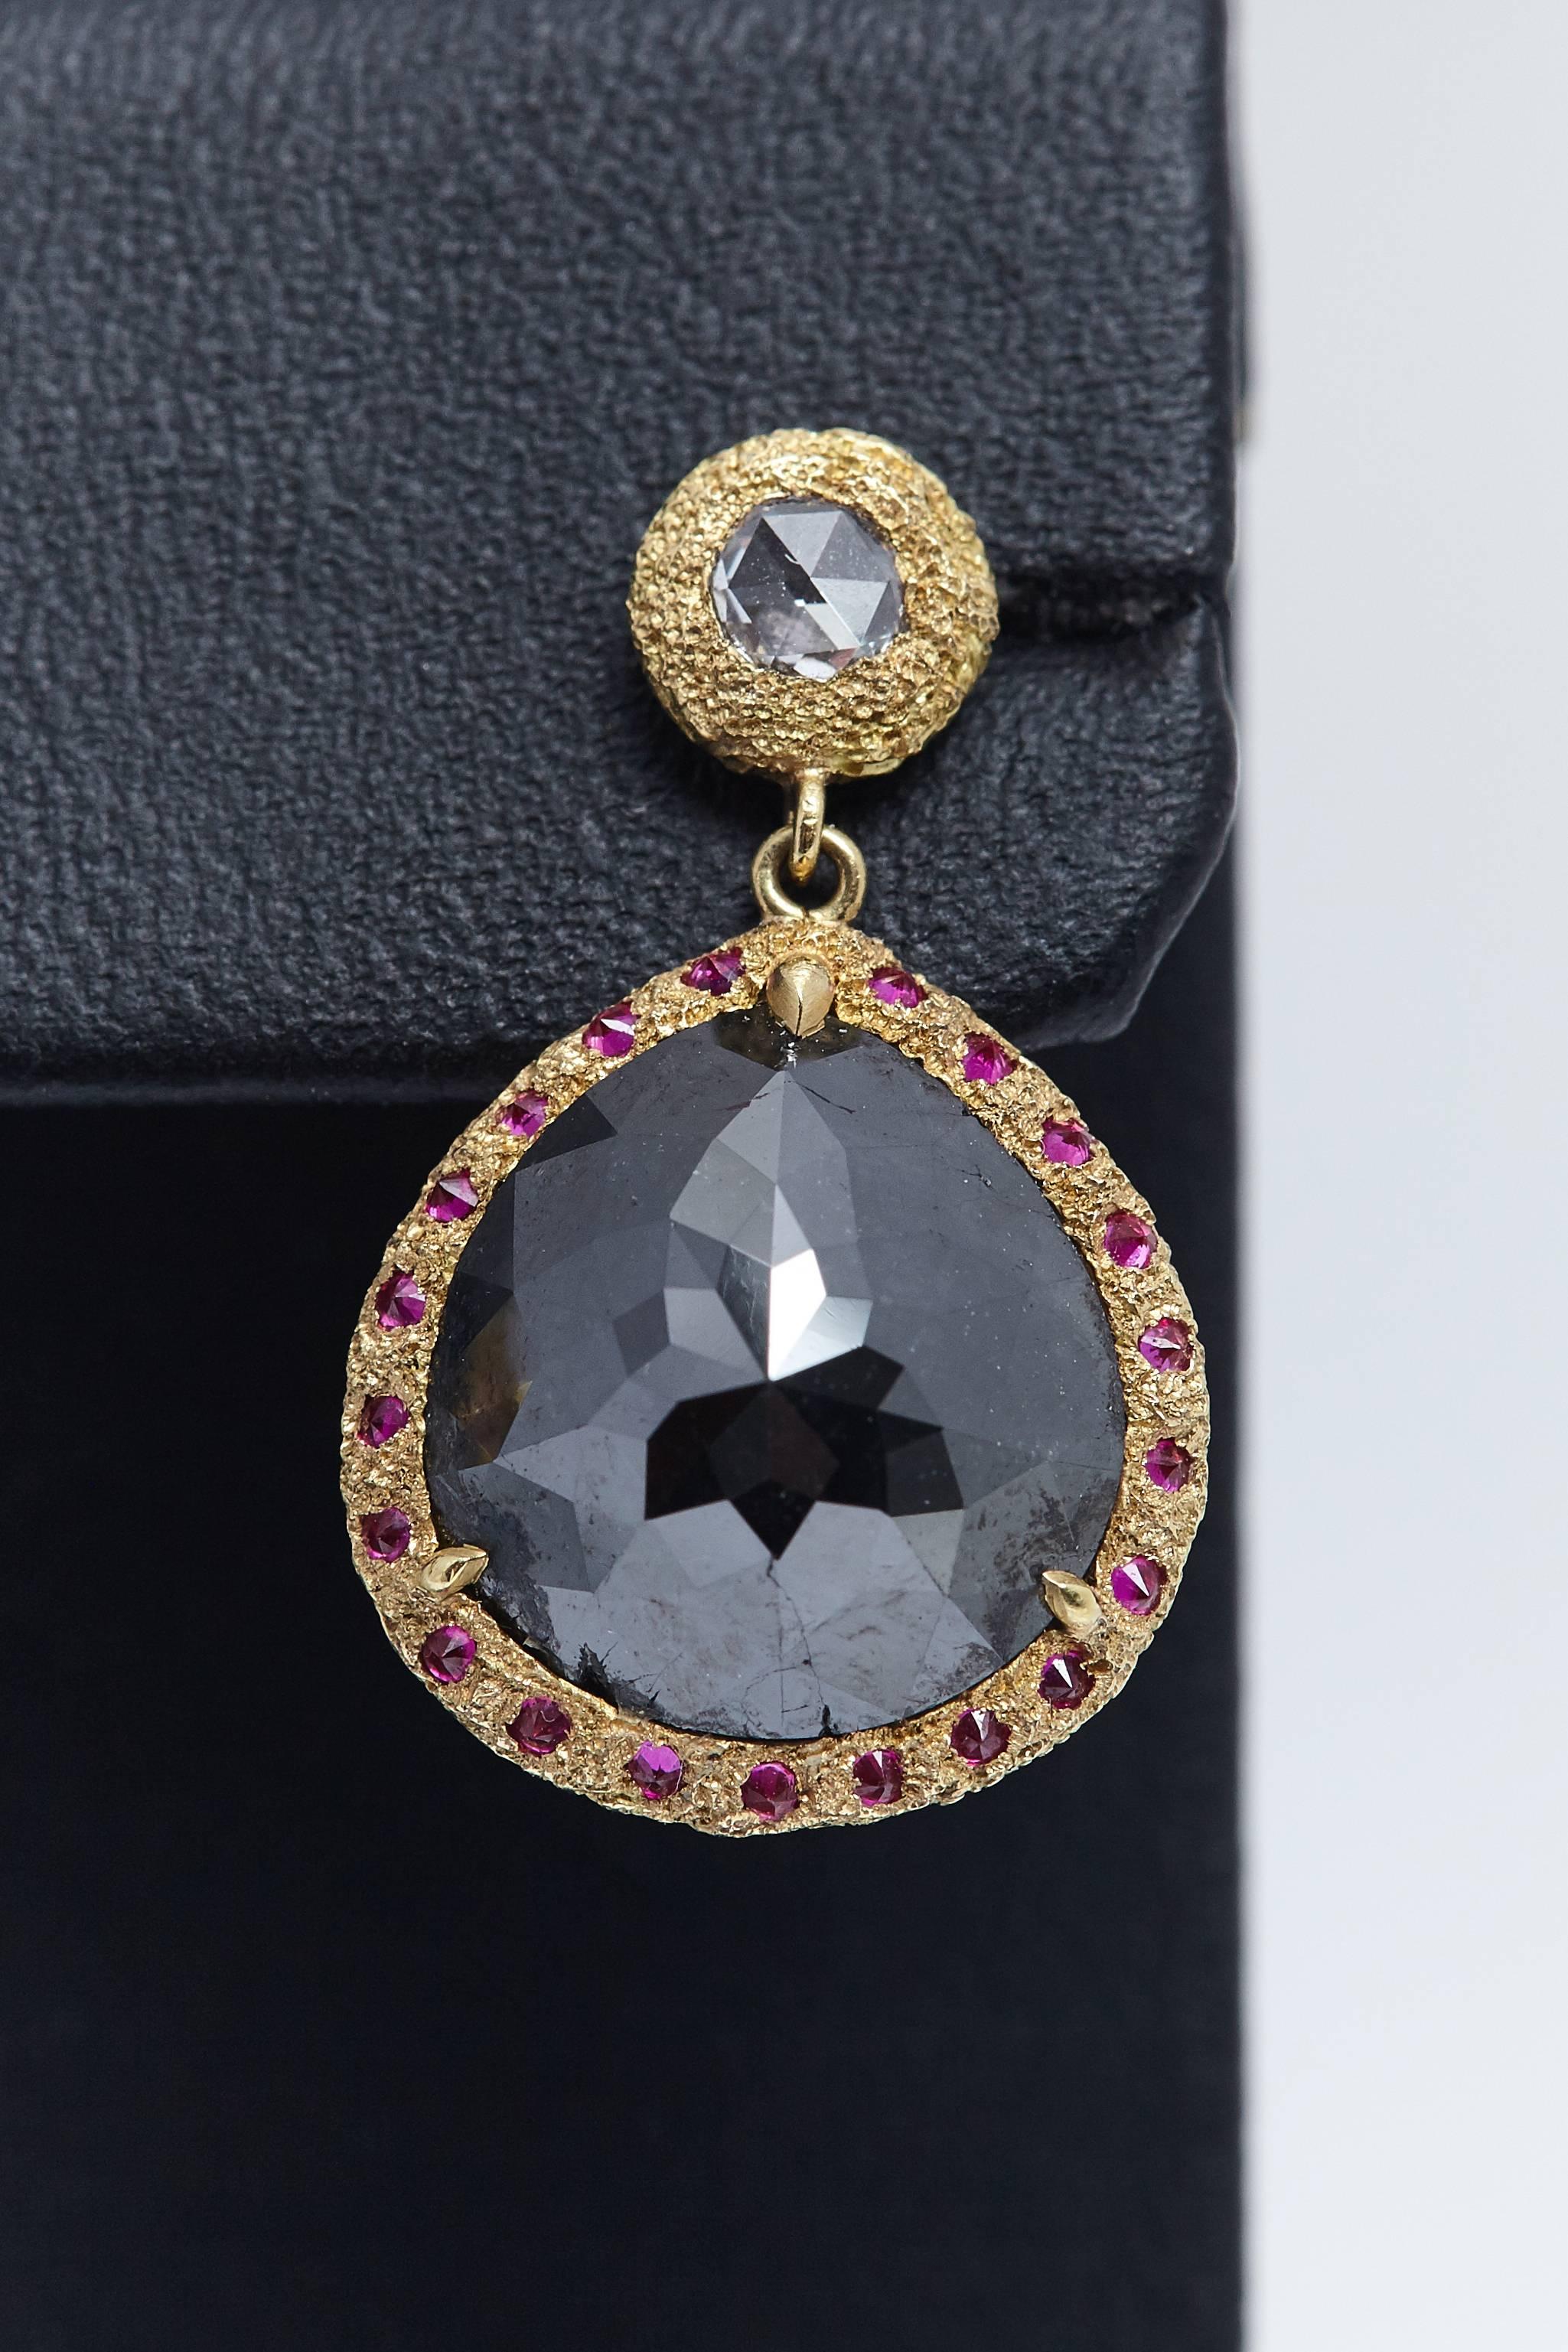 Pair of Treated Black Rose Cut Diamonds with a total weight of approximately 10.30 carats. The diamonds are encircled by rubies which are mounted in eighteen karat yellow gold earrings. The larger diamonds are dangling from a pair of white rose cut